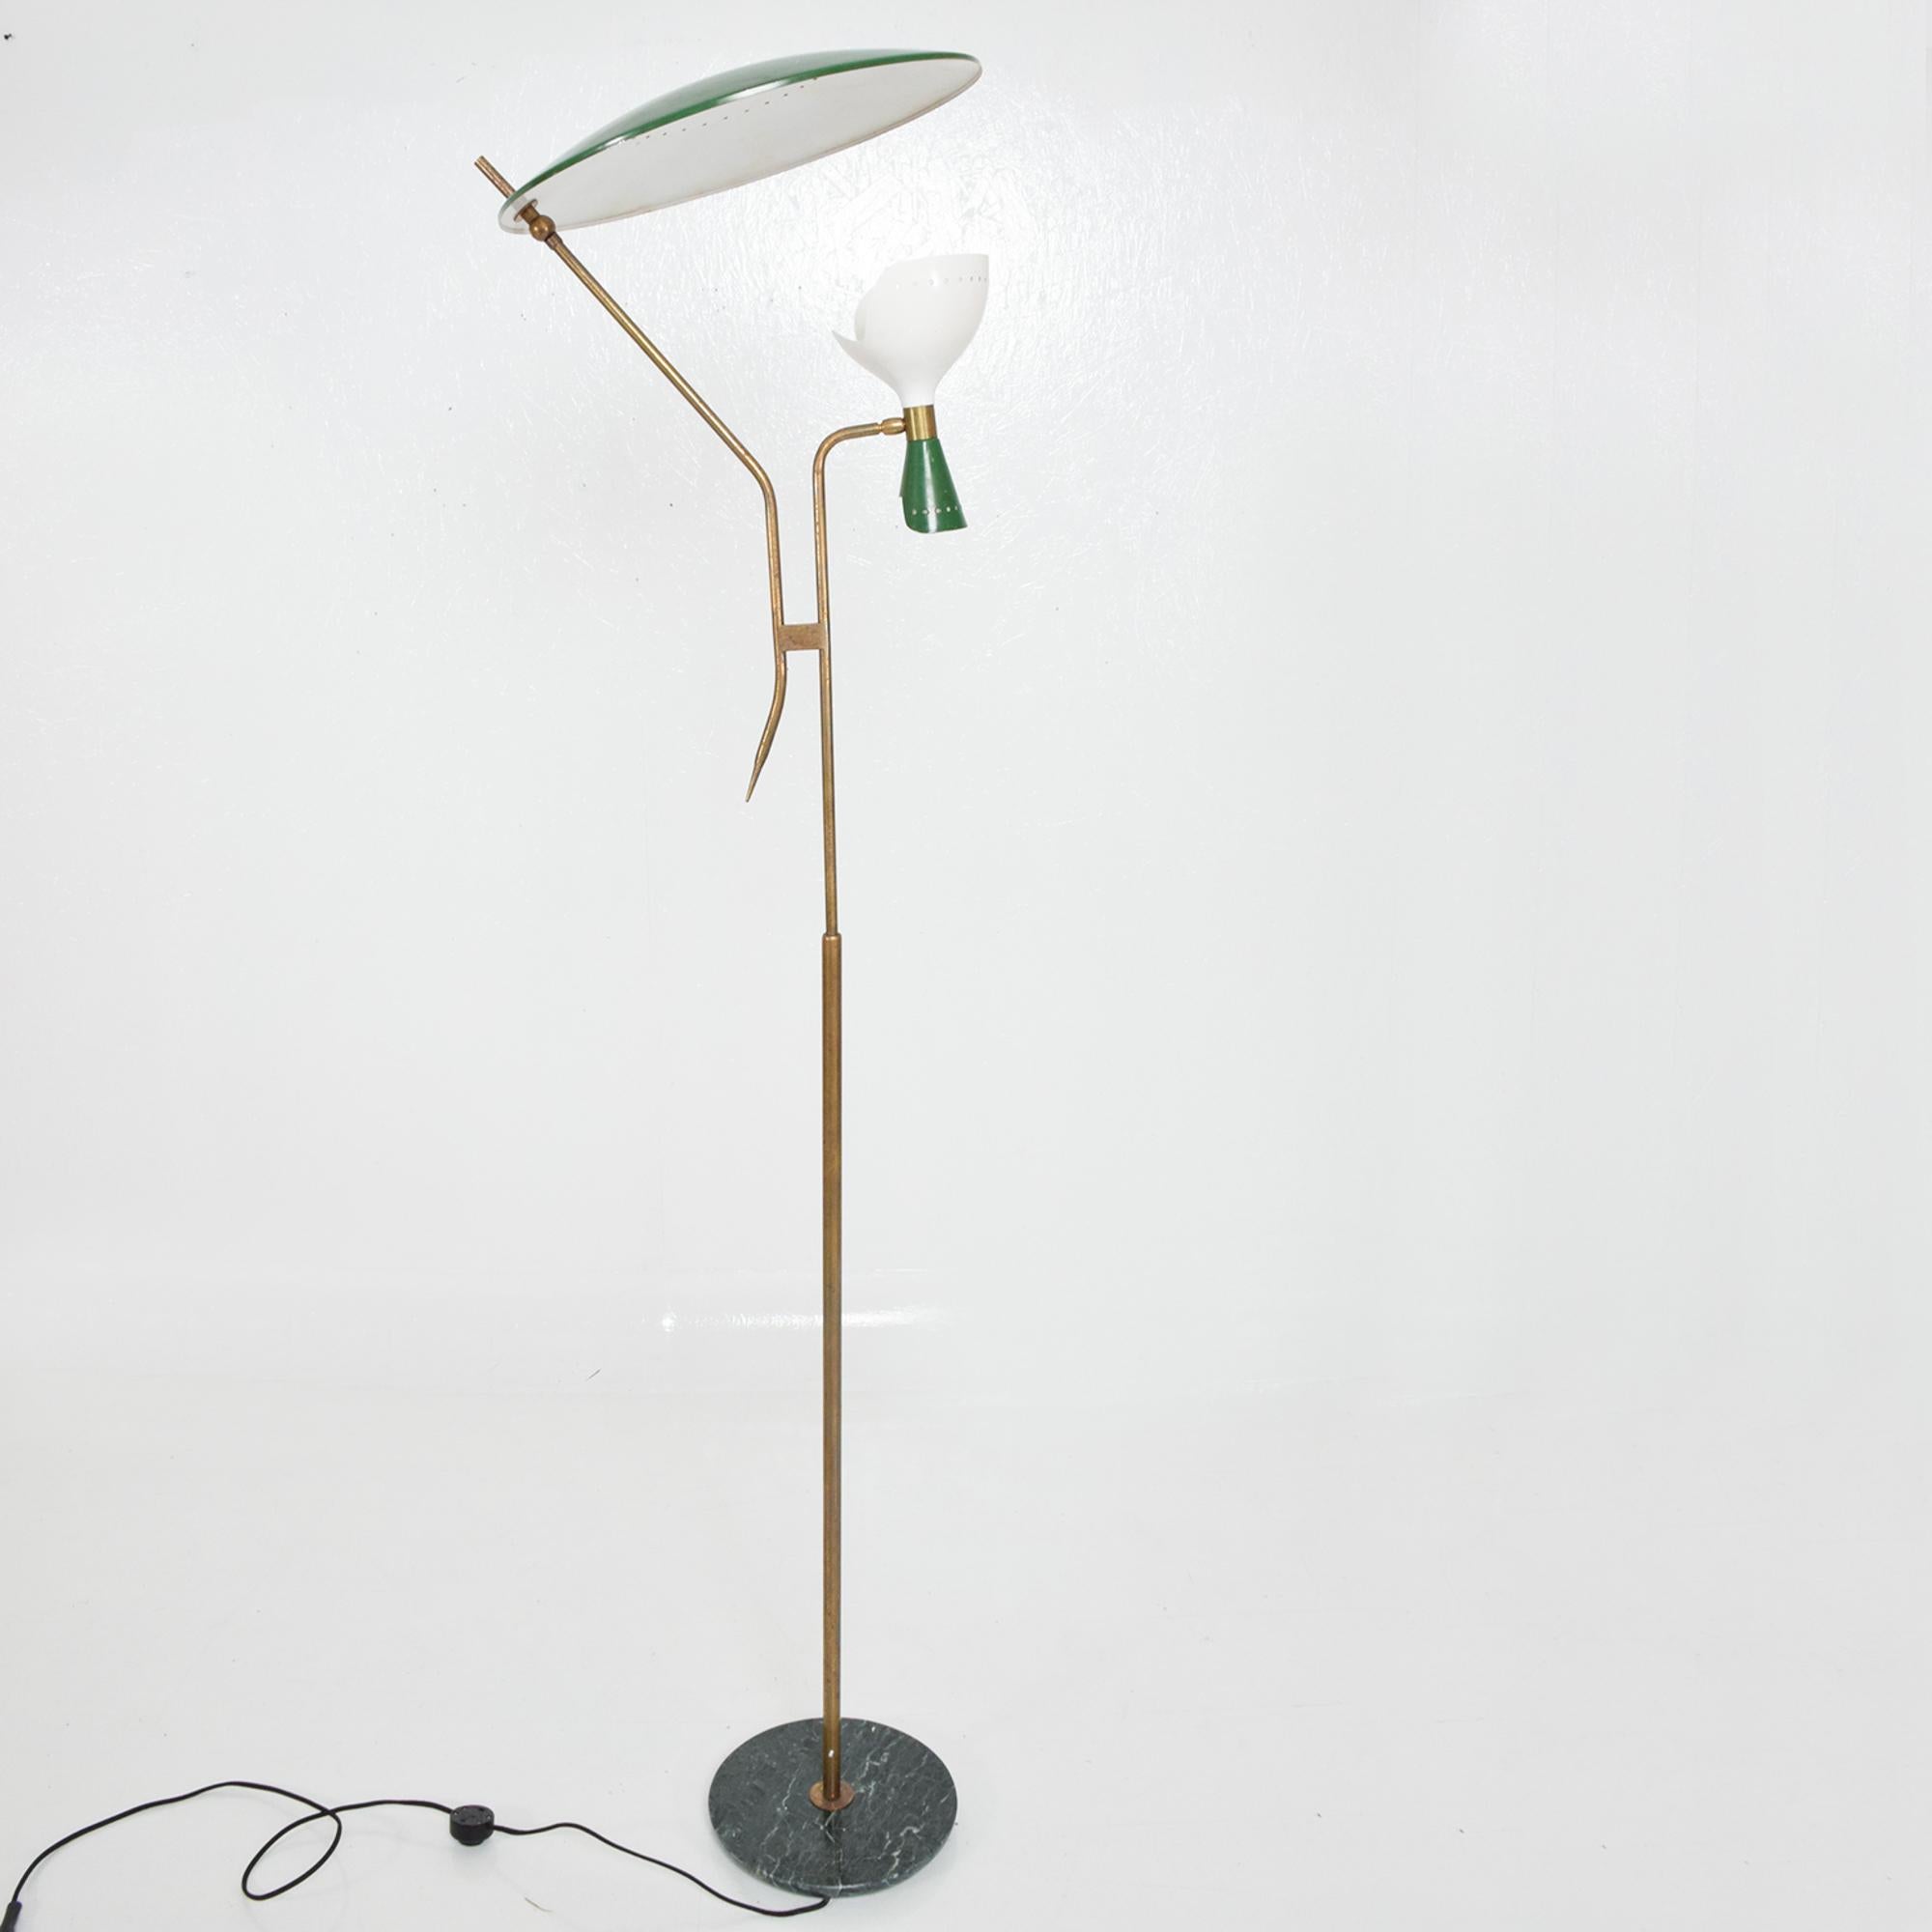 Sensational design Midcentury Modern Floor Lamp attributed to Stilnovo. Made in Italy. Stamp from maker not present. 
Brass body with Original Patina. Dark green Italian Marble Base with Green Reflector at Top. Features fabulous Dual Cone